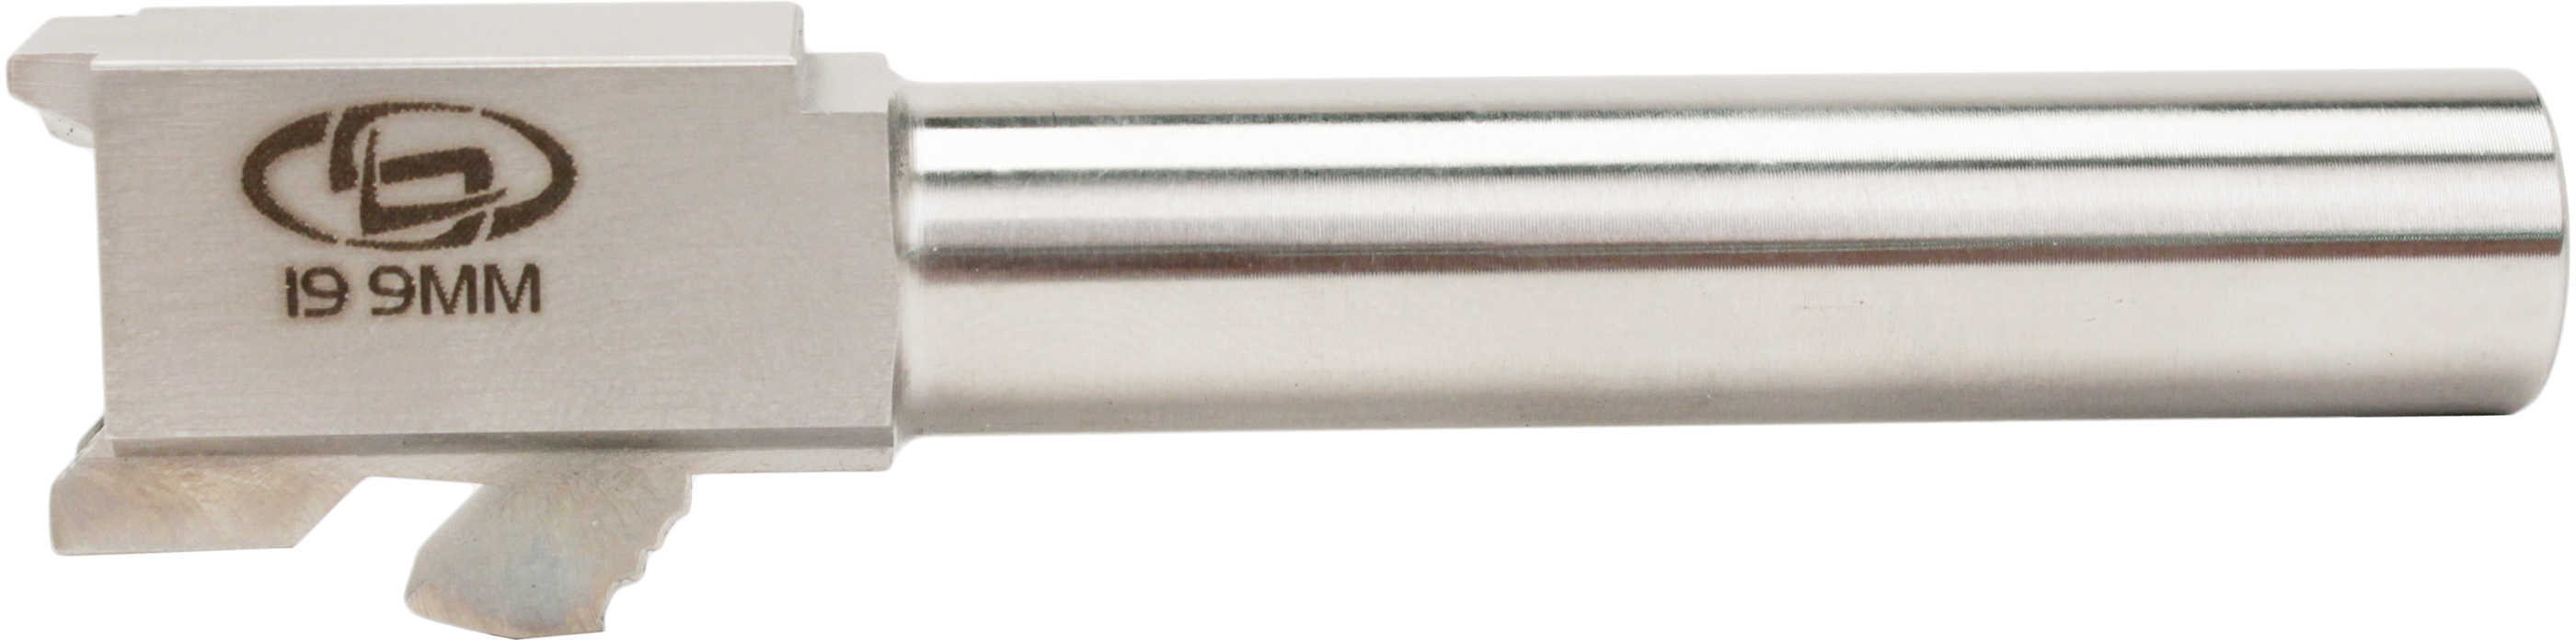 StormLake Barrels Lake 9MM 4.02" Stainless Match for Glock 19 GL-19-9MM-402-OP-00T